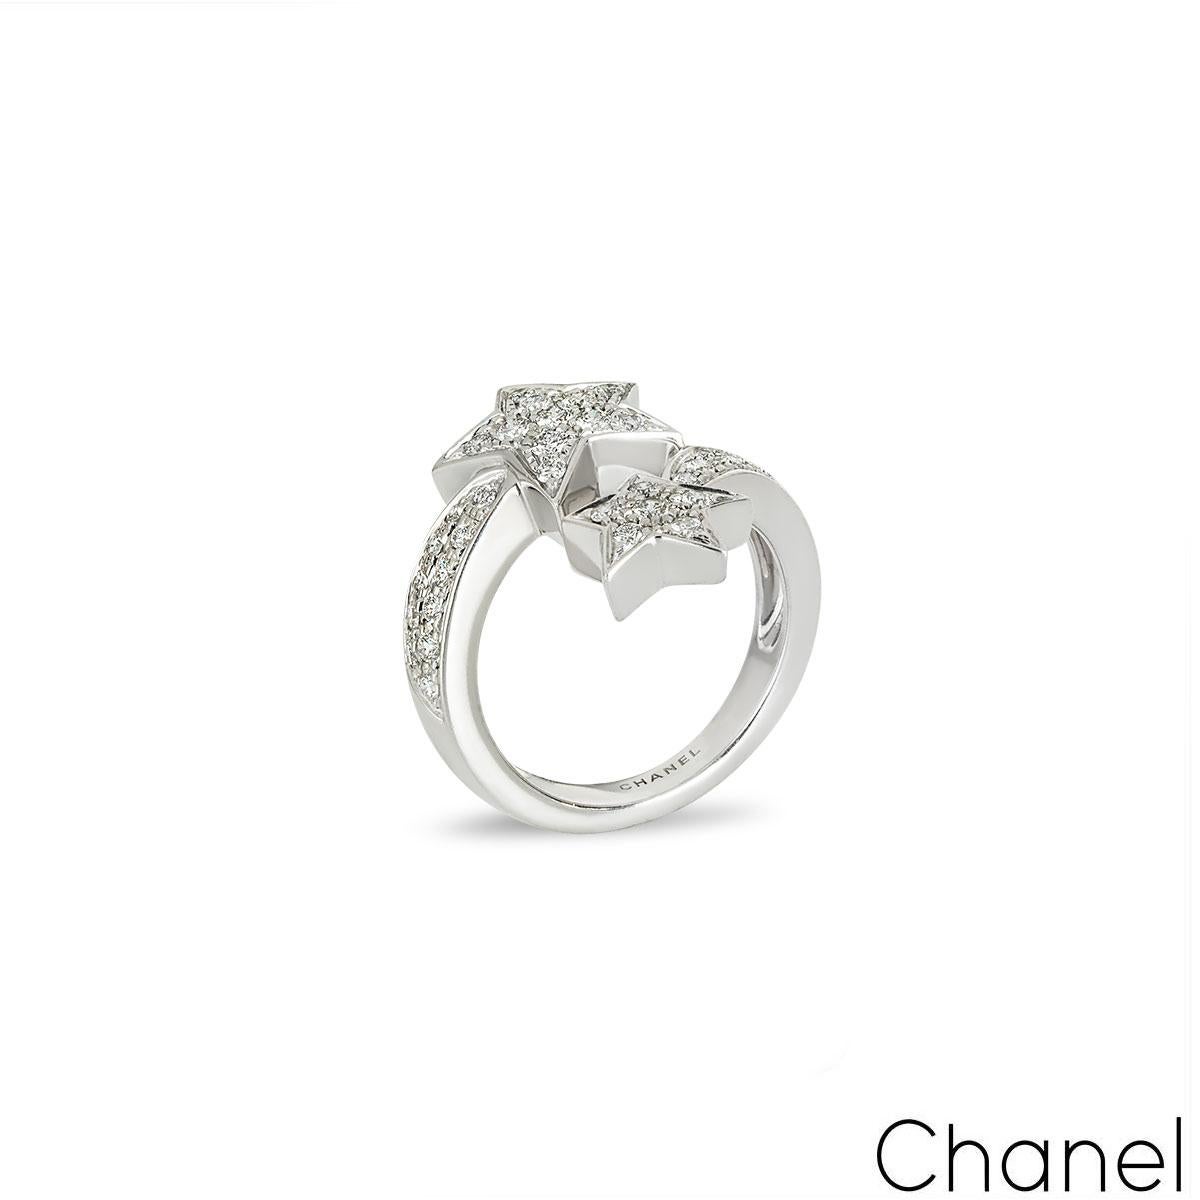 A stunning 18k white gold diamond ring by Chanel from the Comete collection. The ring comprises of two shooting star motifs with round brilliant cut diamonds pave set, with a total weight of approximately 0.65ct, D-F colour and VVS1 clarity. The